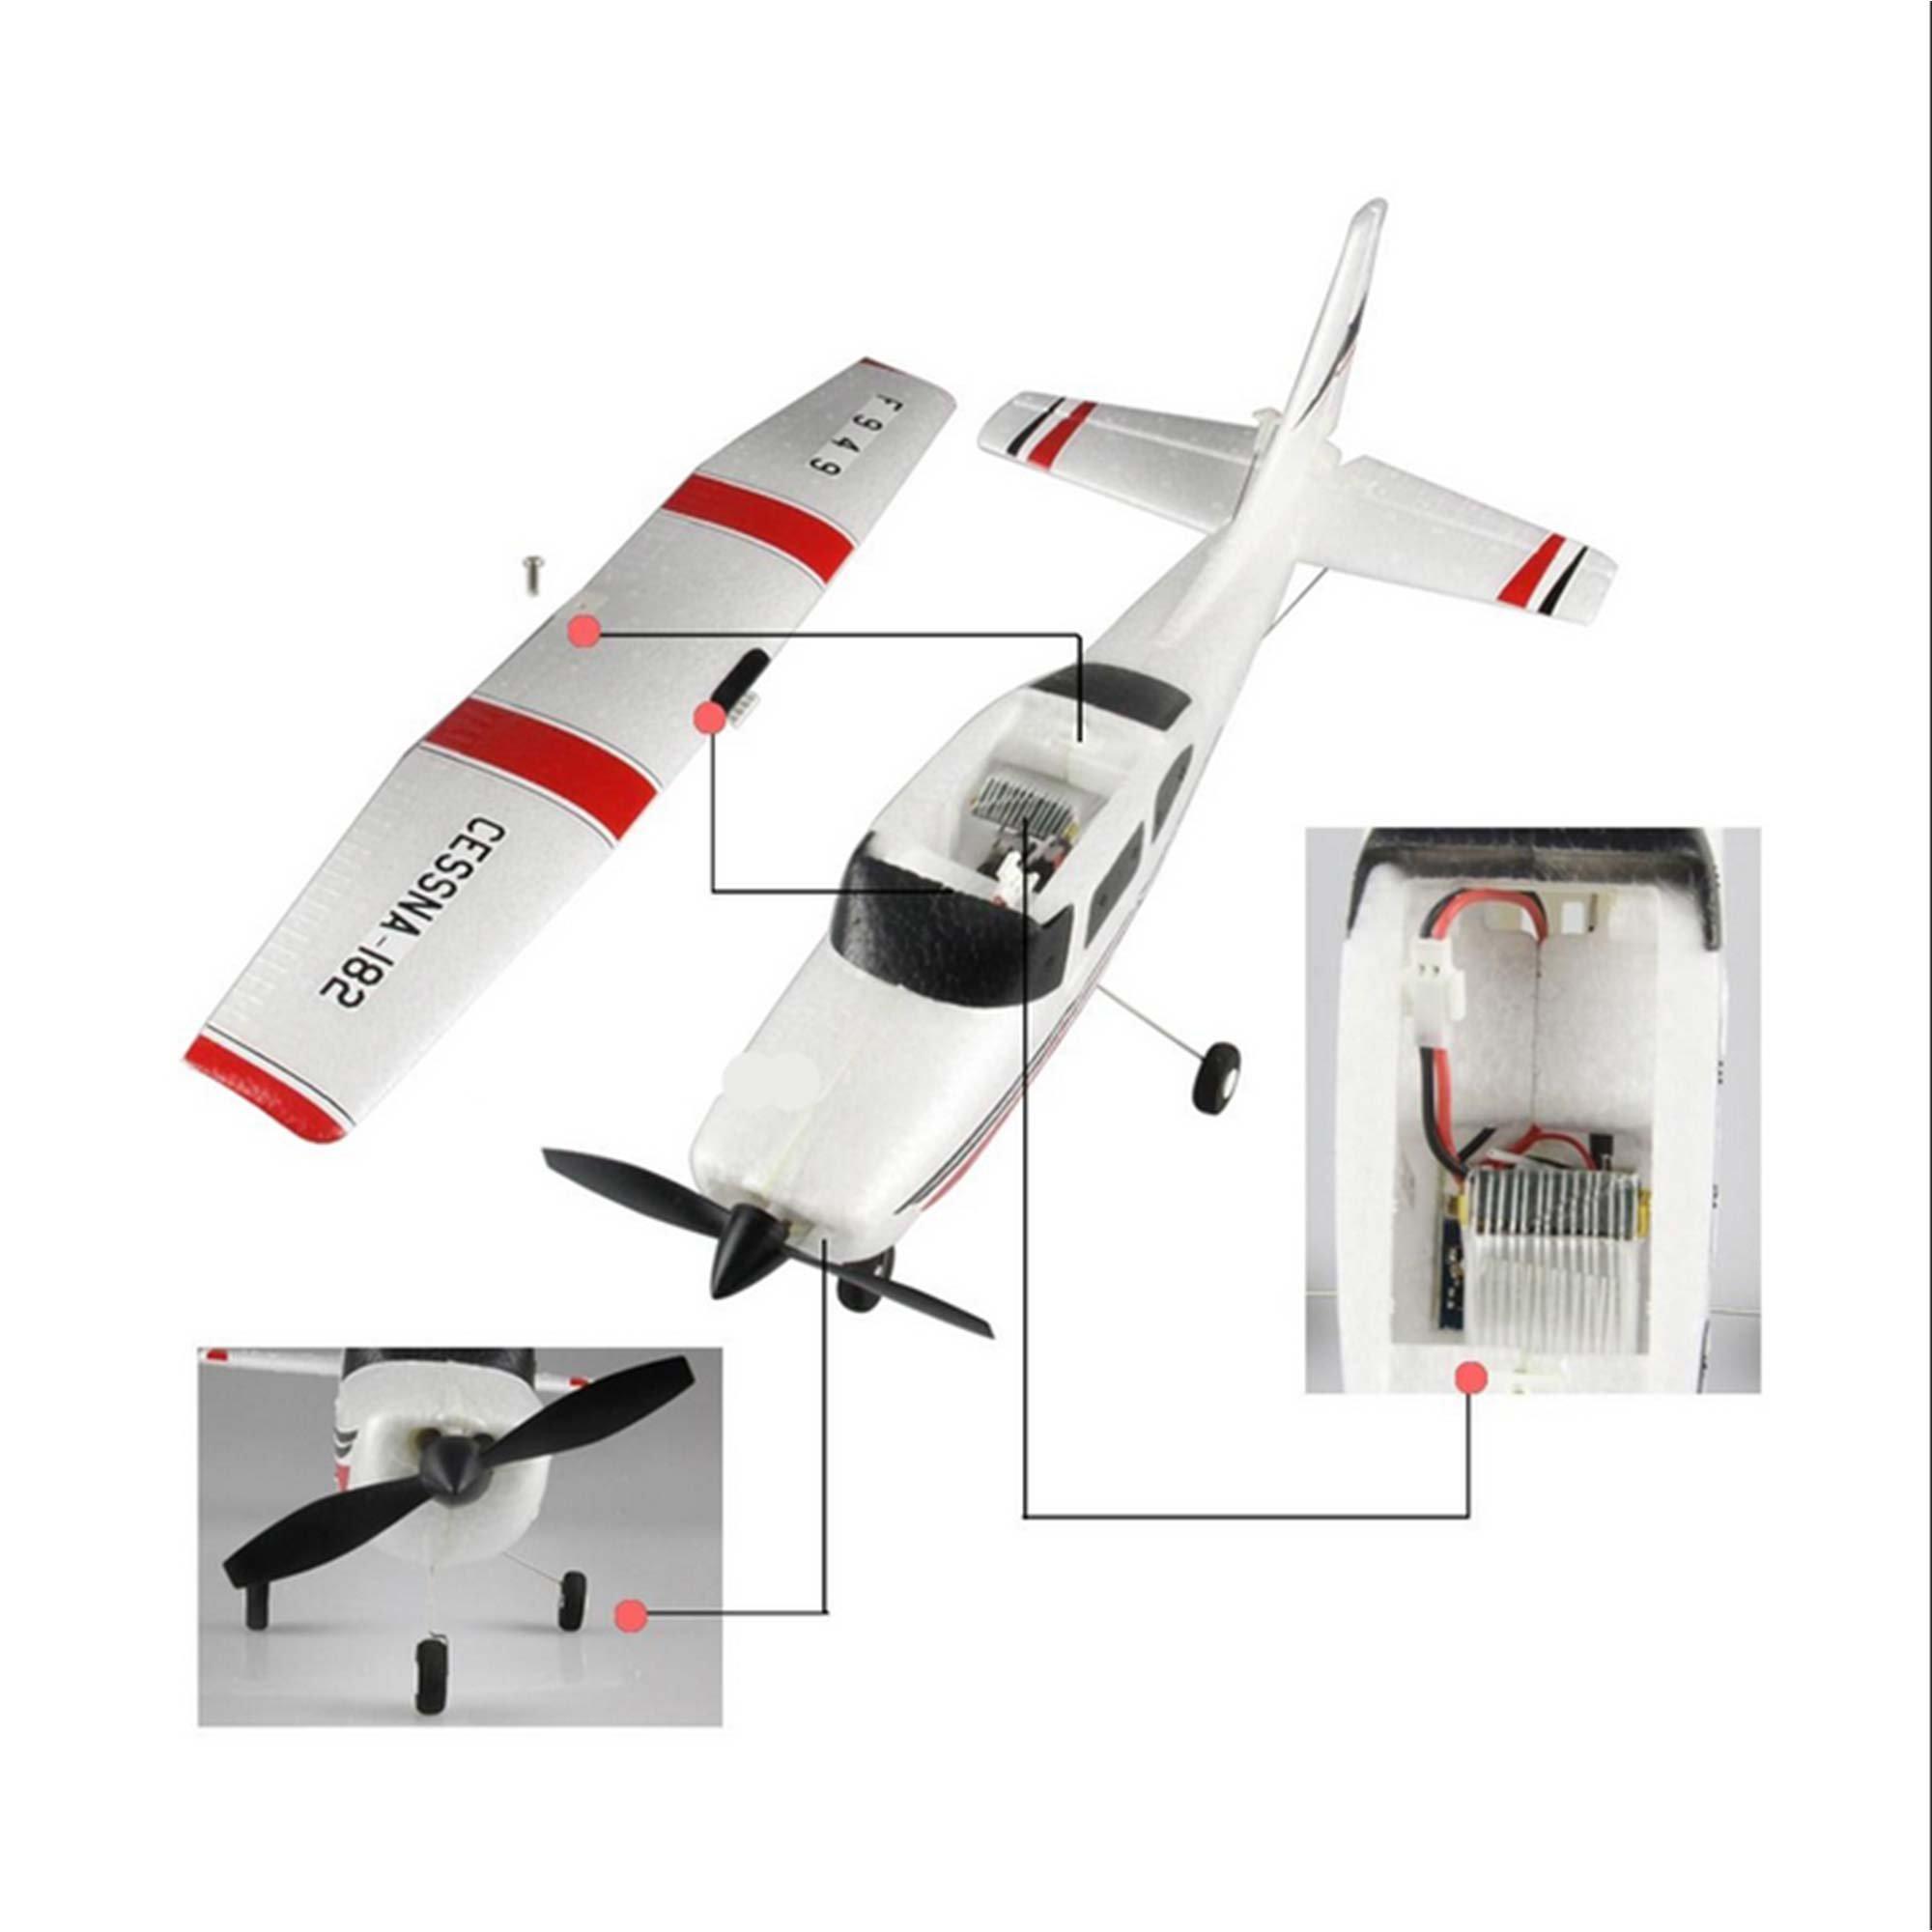 Wltoys Cessna 182 F949: WLtoys Cessna 182 F949: The Perfect Beginner's RC Airplane